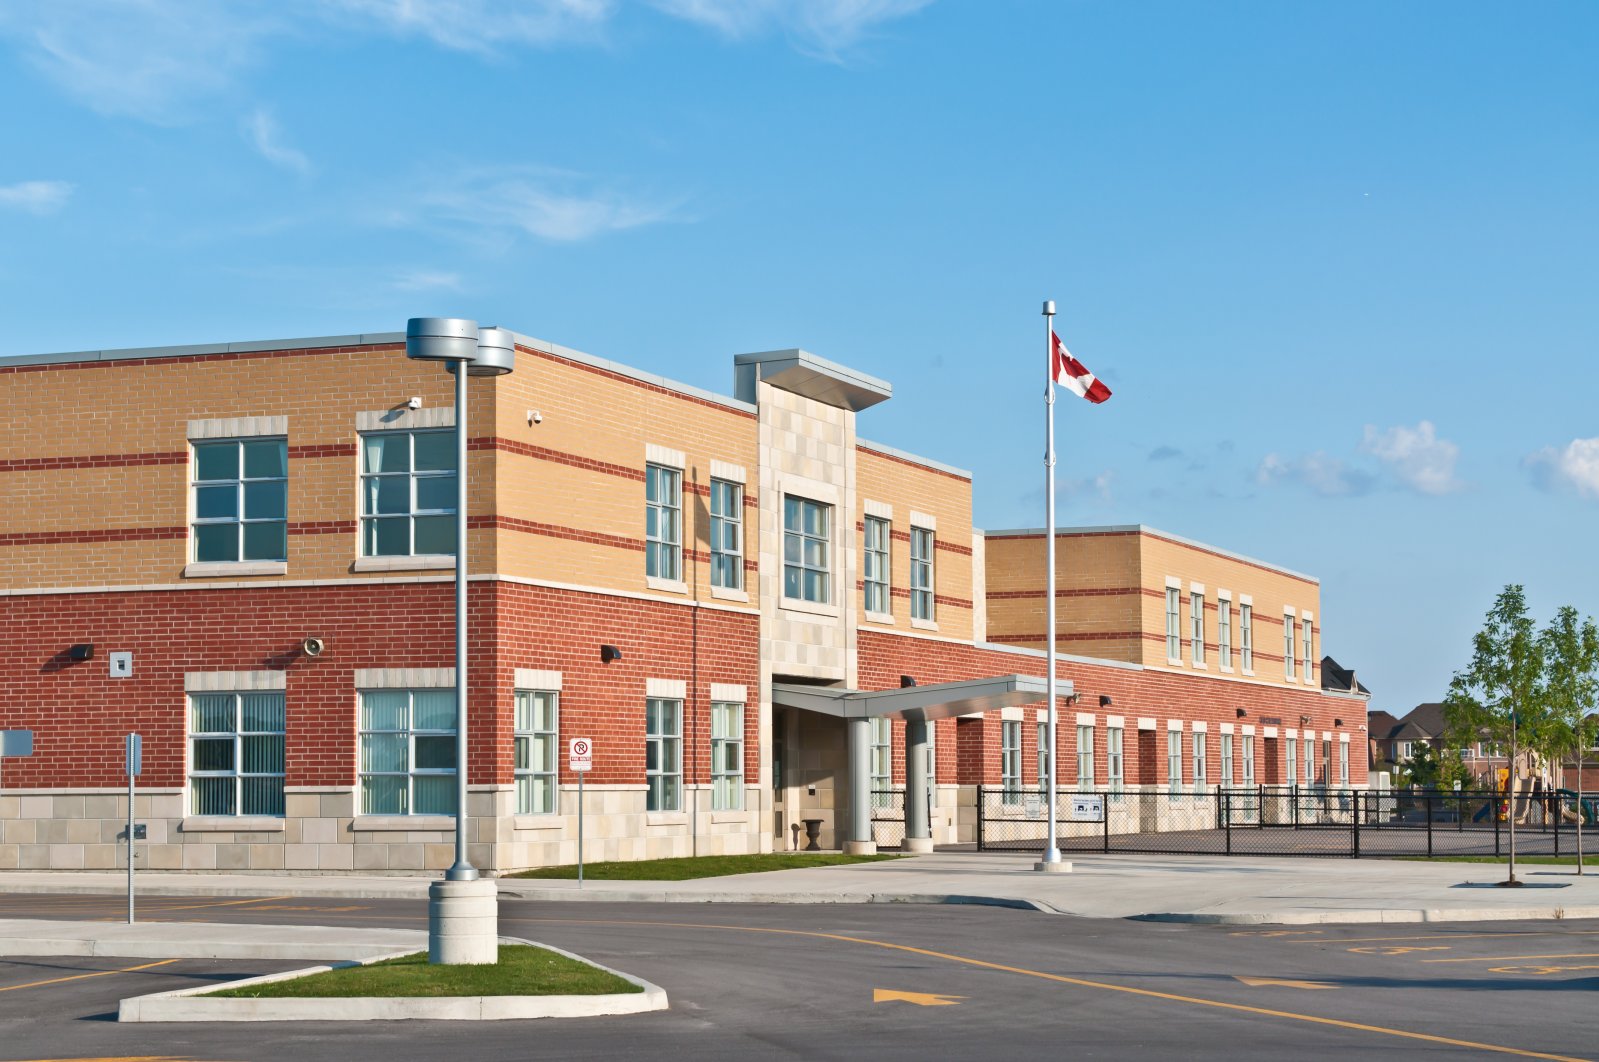 A new Canadian elementary school building with a flagpole and parking lot in this undated file photo. (Shutterstock File Photo)